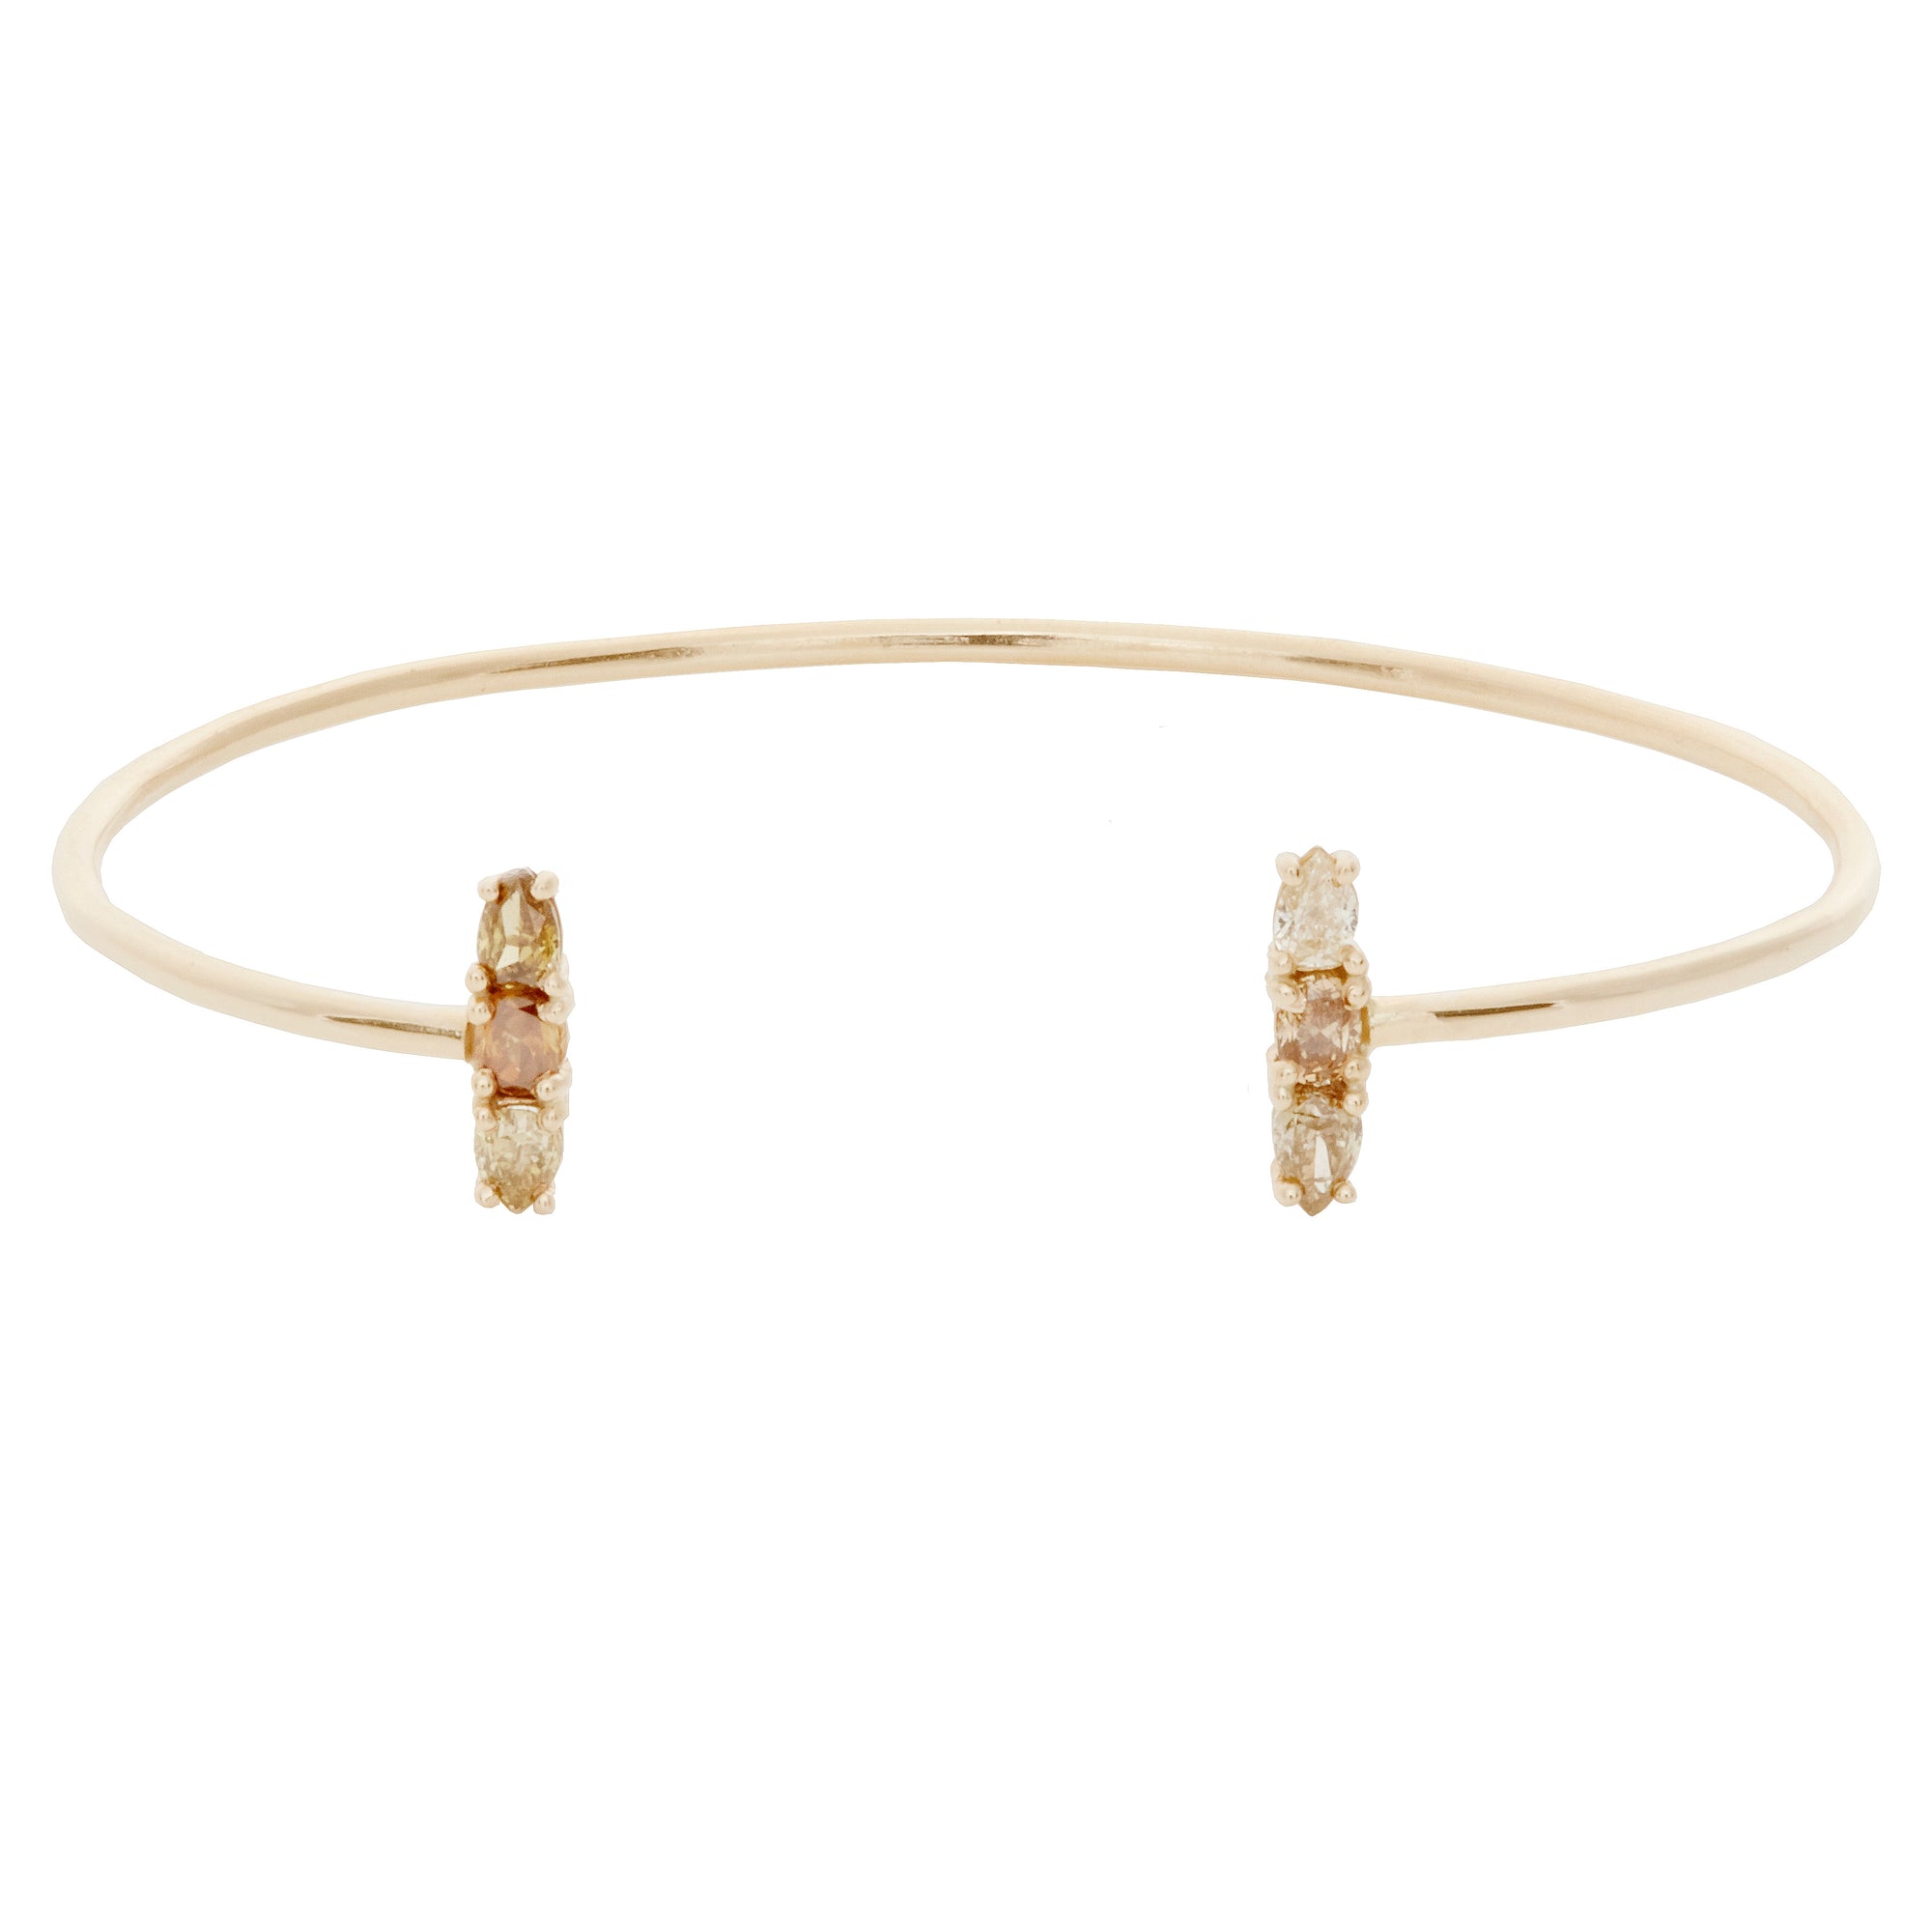 Stardust yellow gold natural color diamond cuff